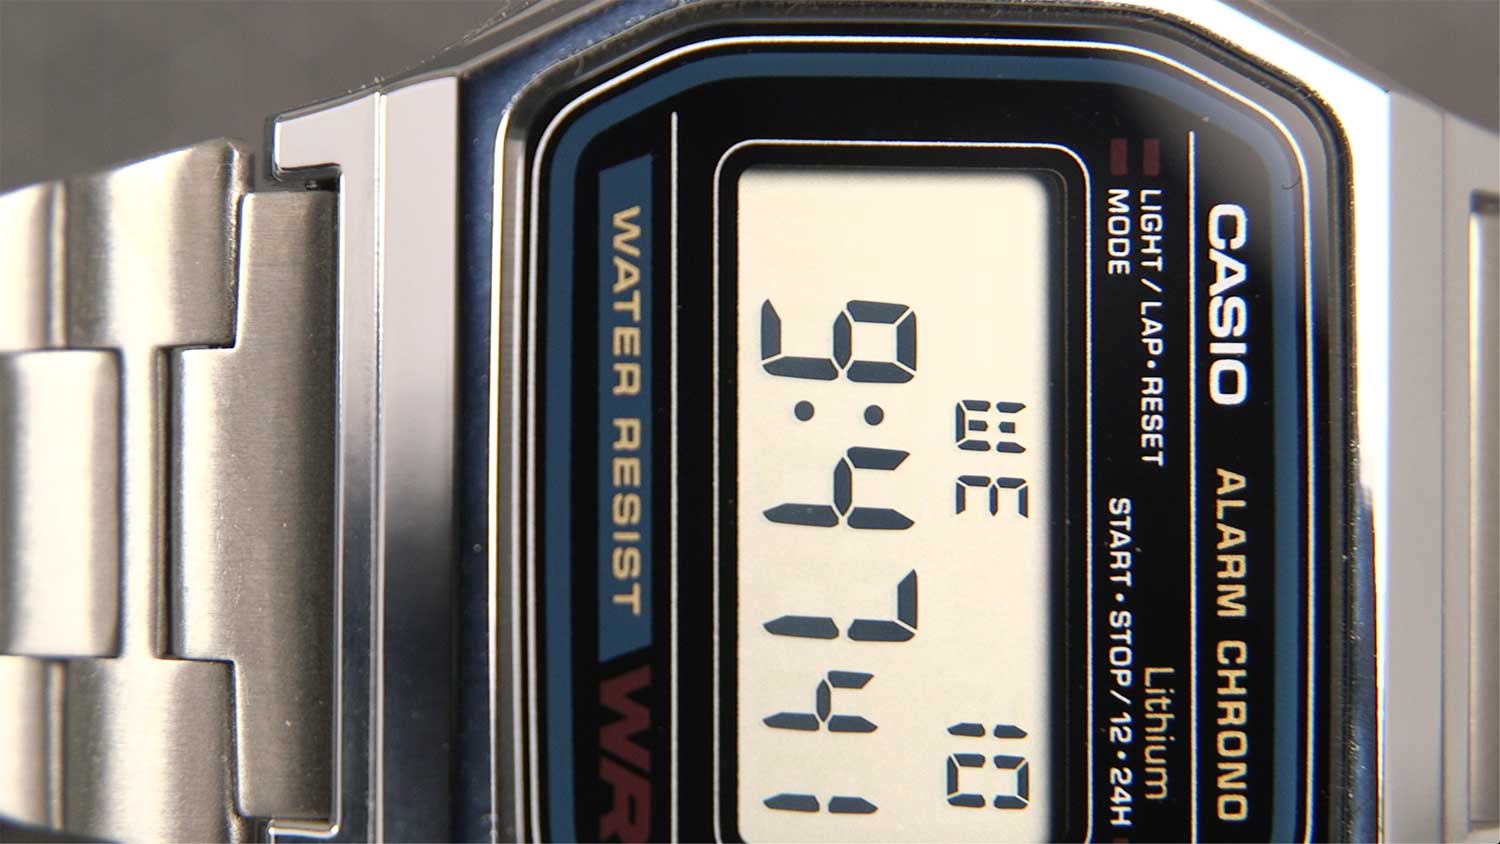 Casio-A158W-Watch-Review-best-inexpensive-digital-watch-2021